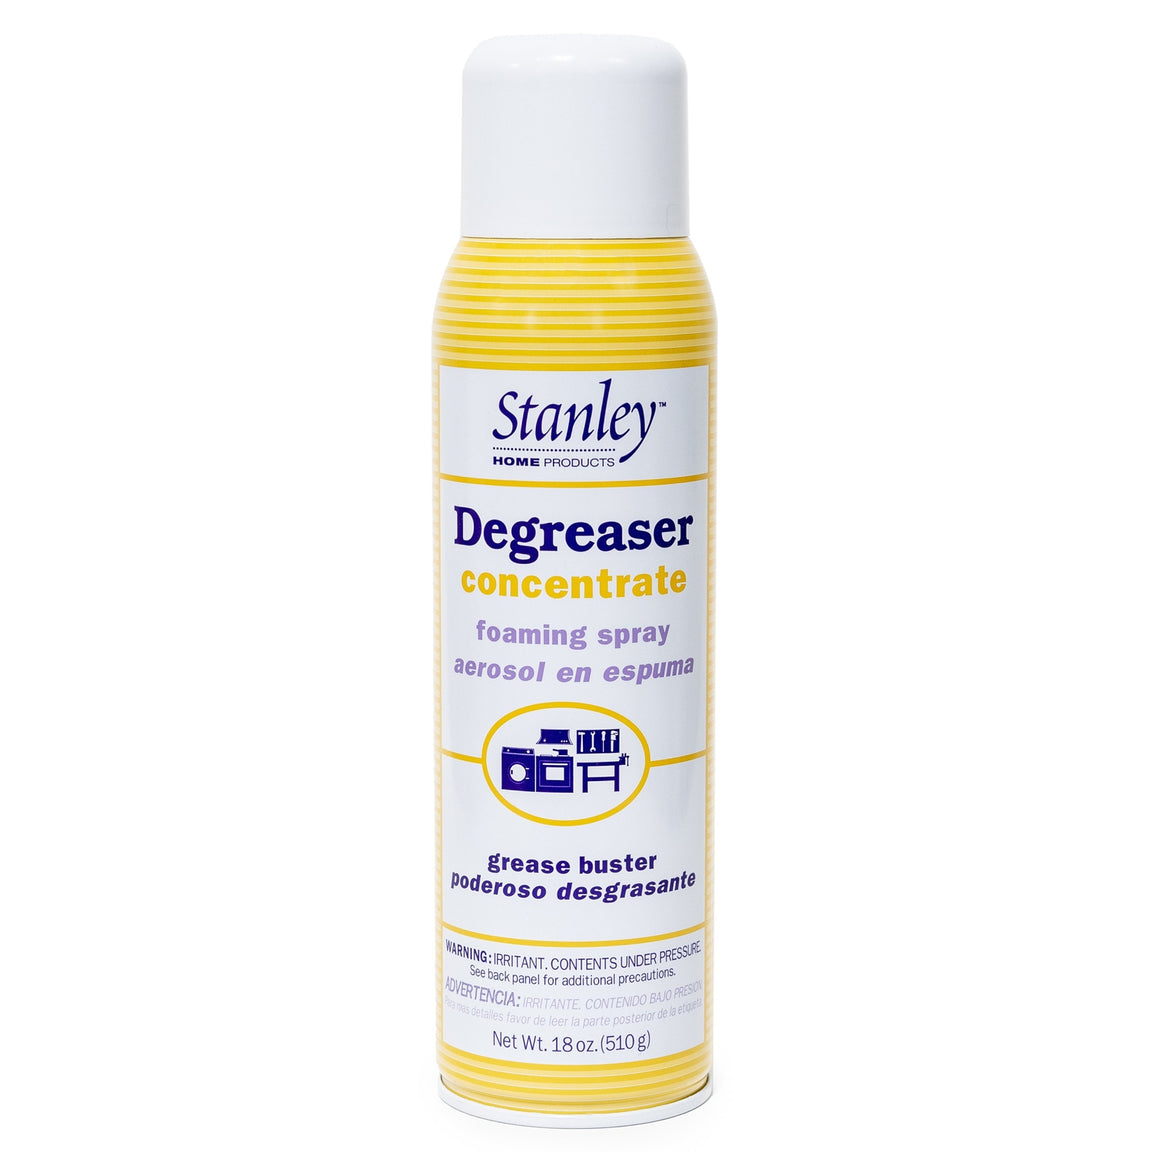 Degreaser Concentrate Foaming Spray Degreasers 1152x1152 ?v=1596017118